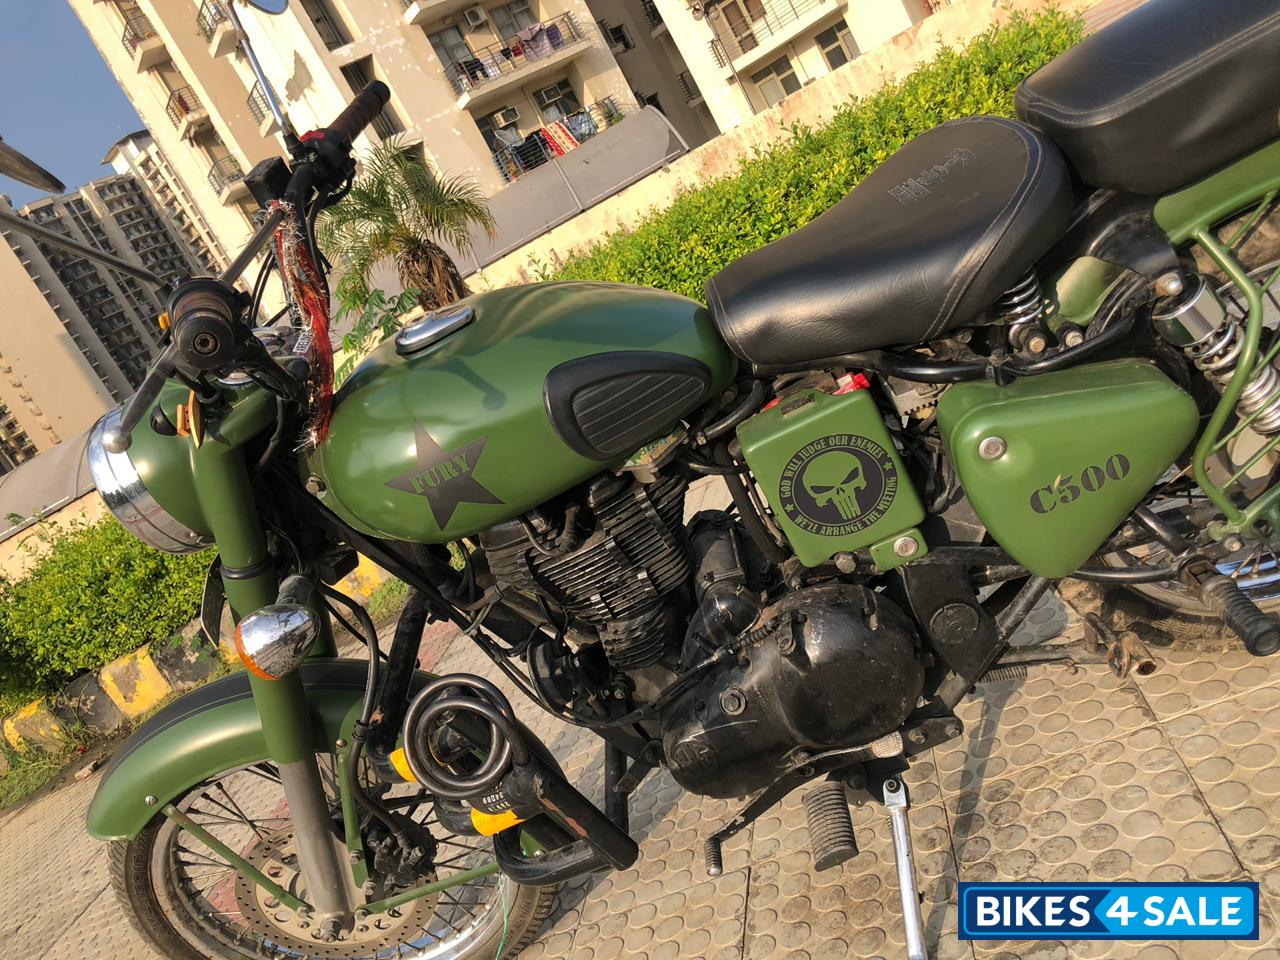 Olive Green Royal Enfield Classic 500